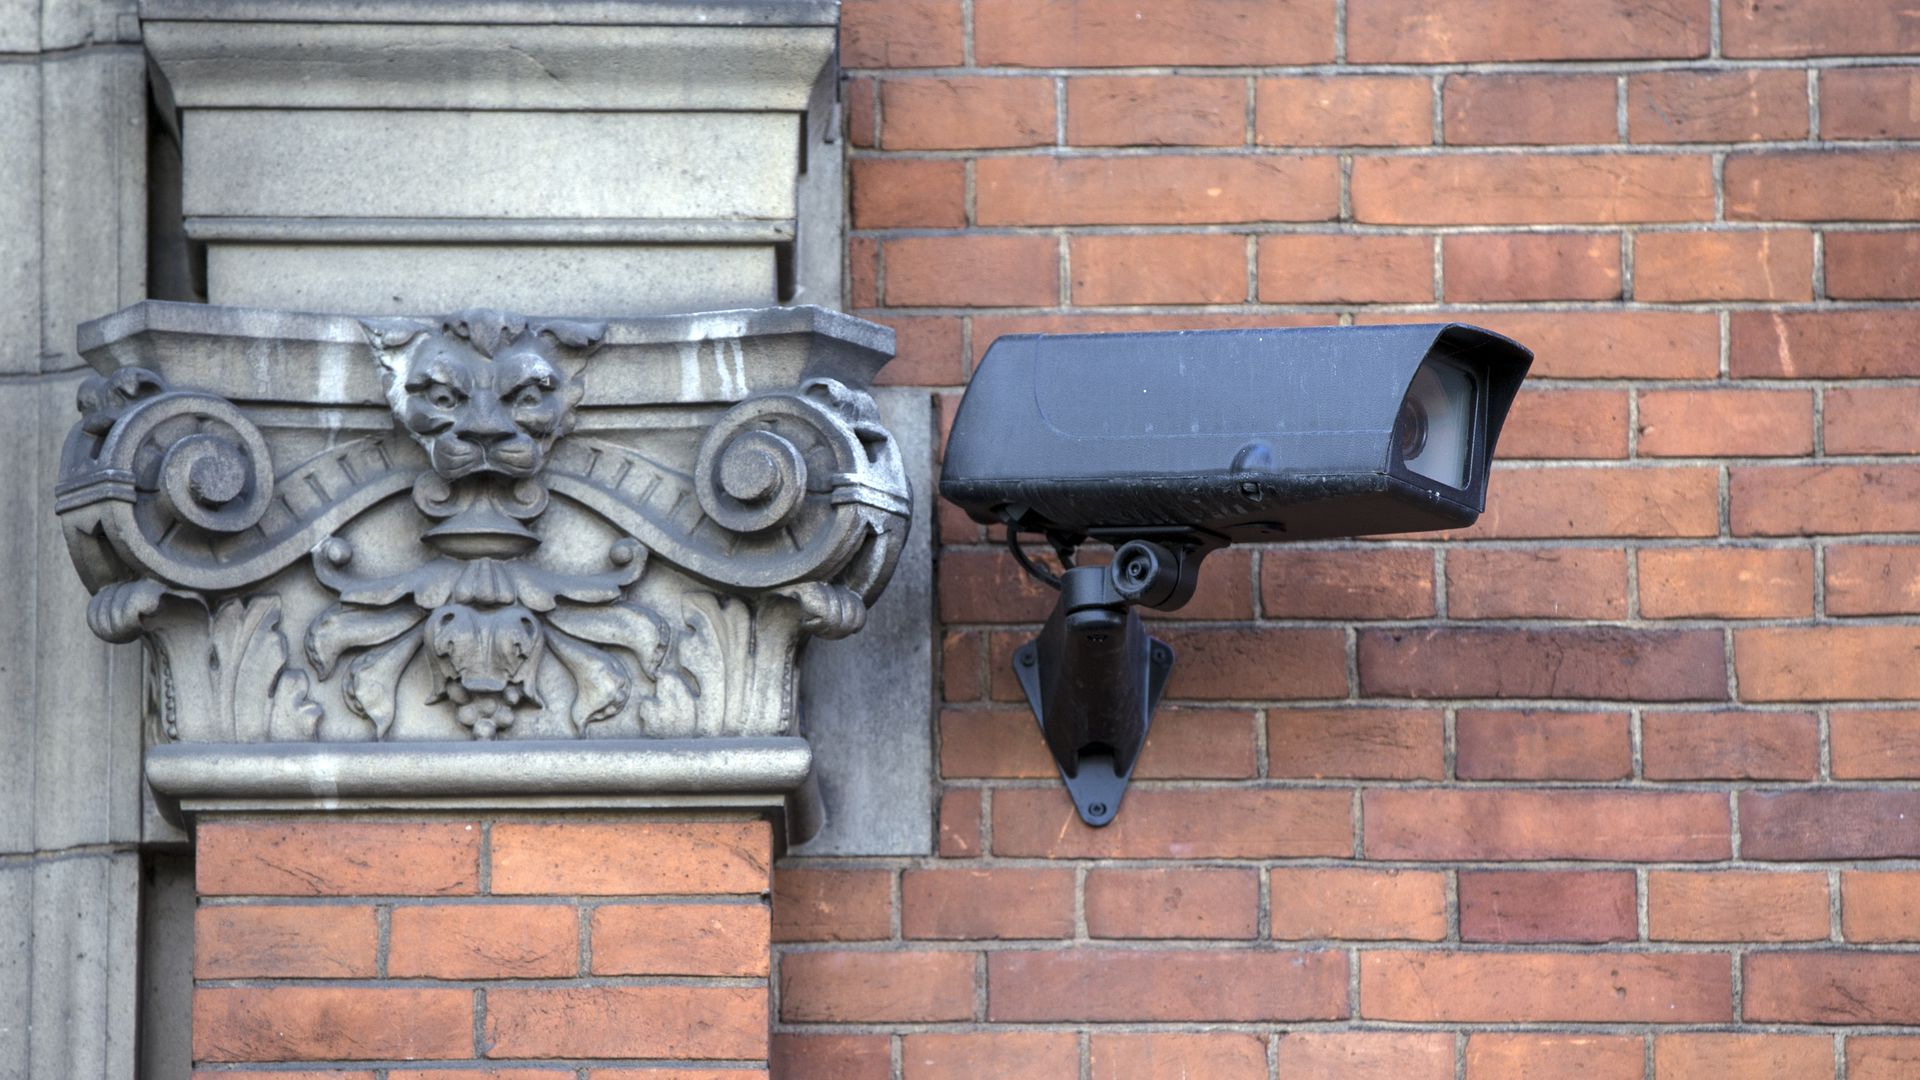 A surveillance camera is mounted on a wall.